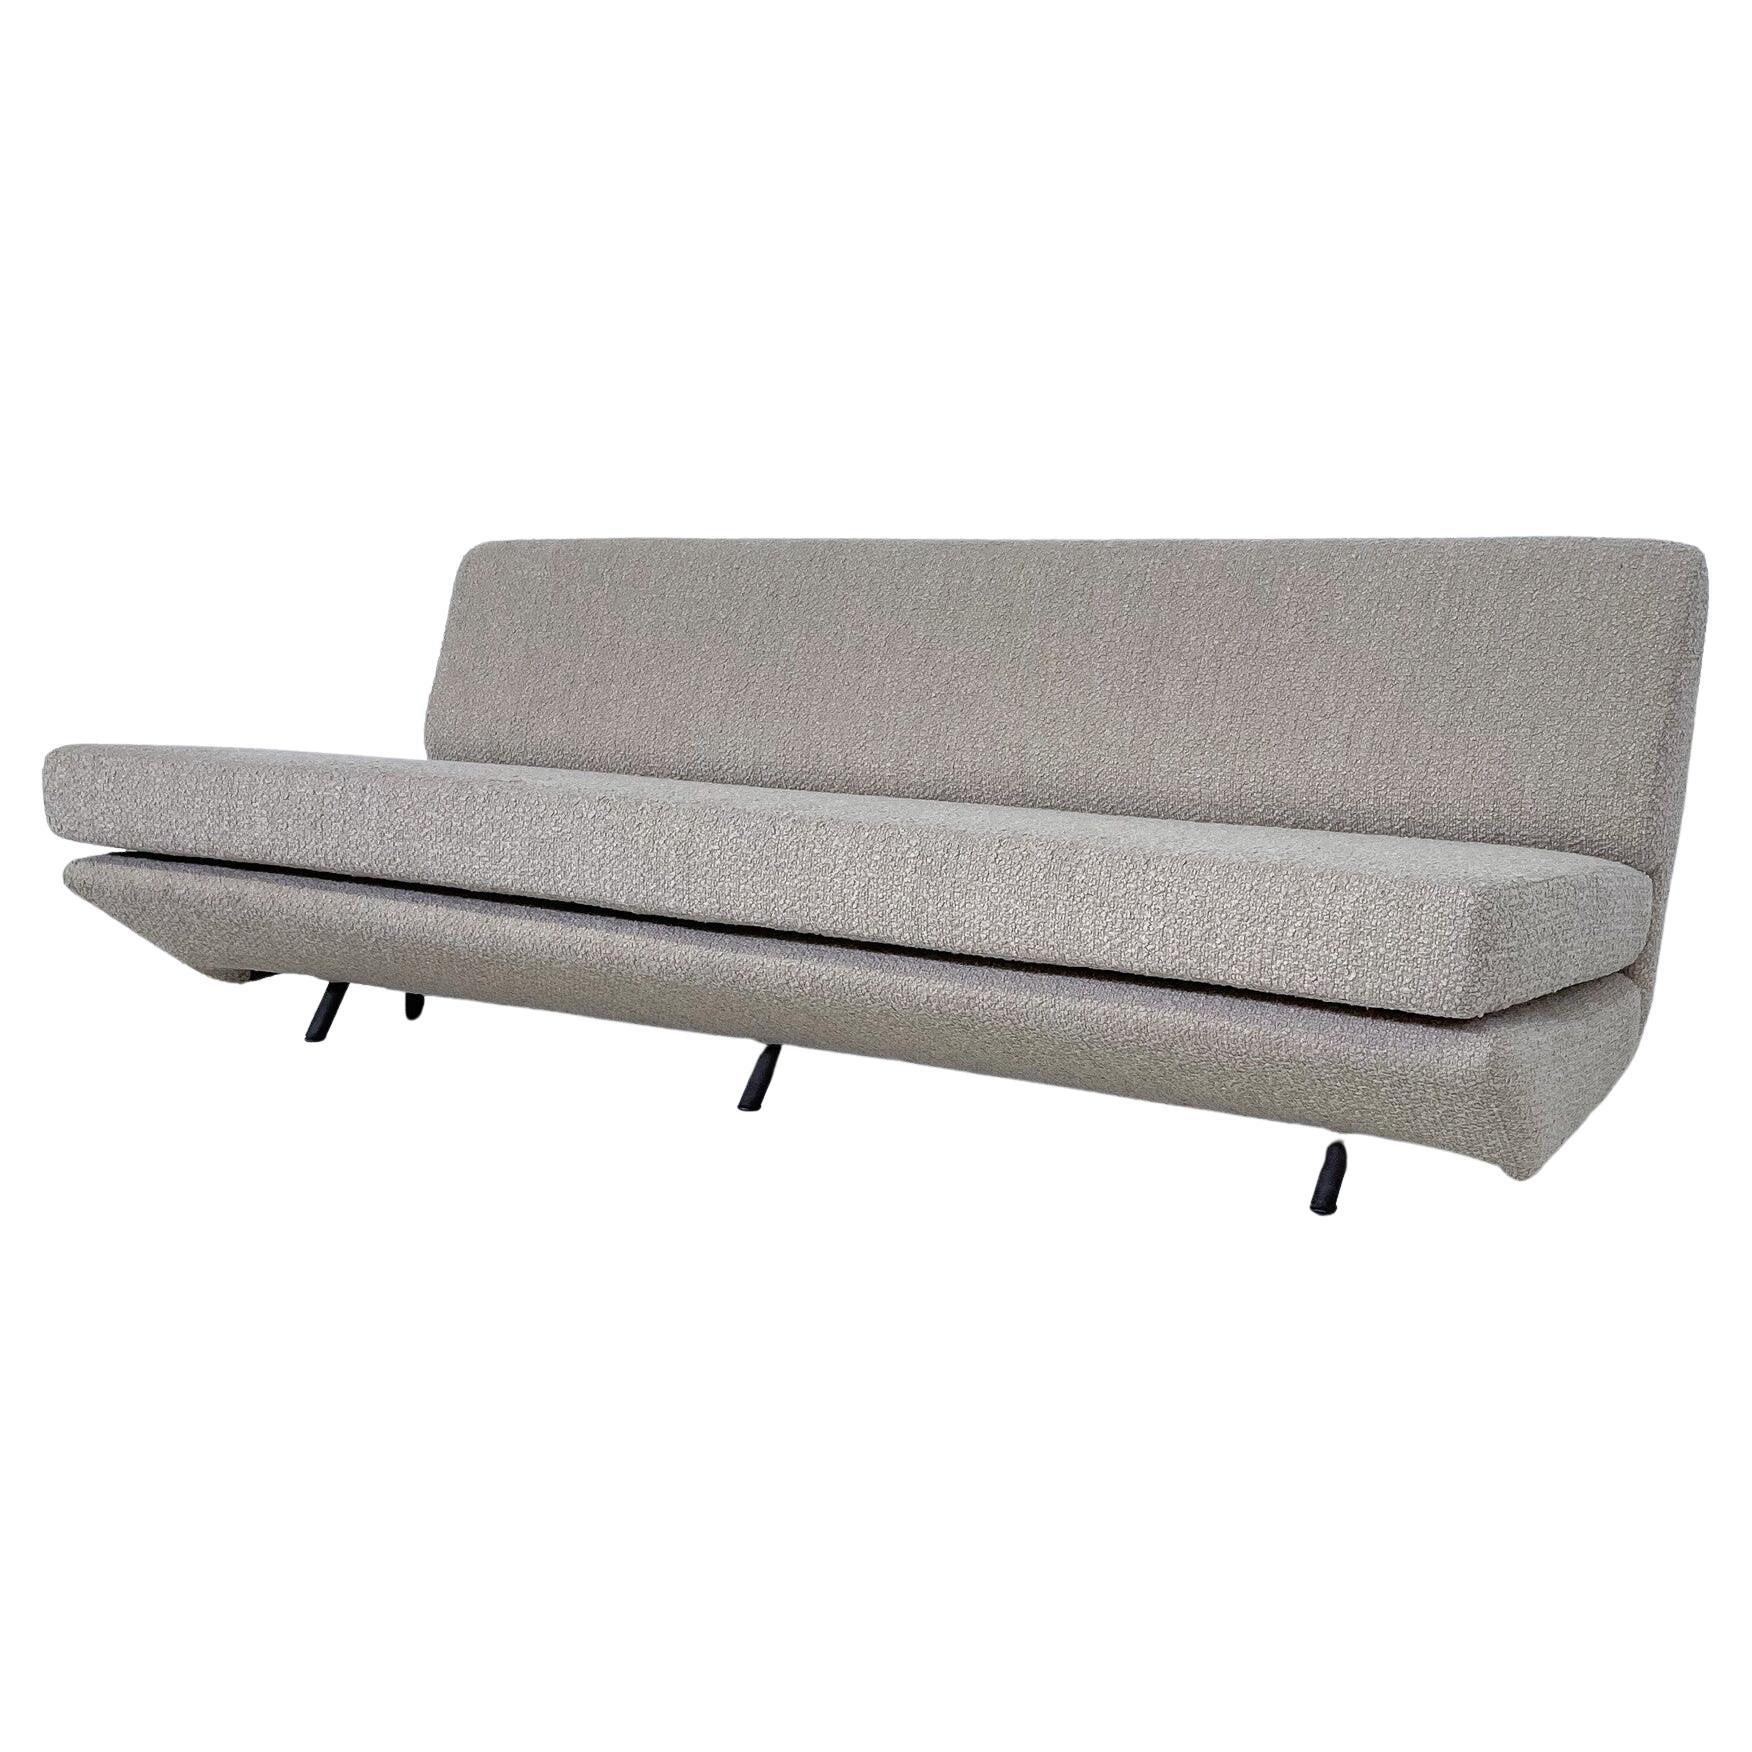 Mid-Century Modern Sofa by Marco Zanuso, Italy, 1950s, New Beige Upholstery